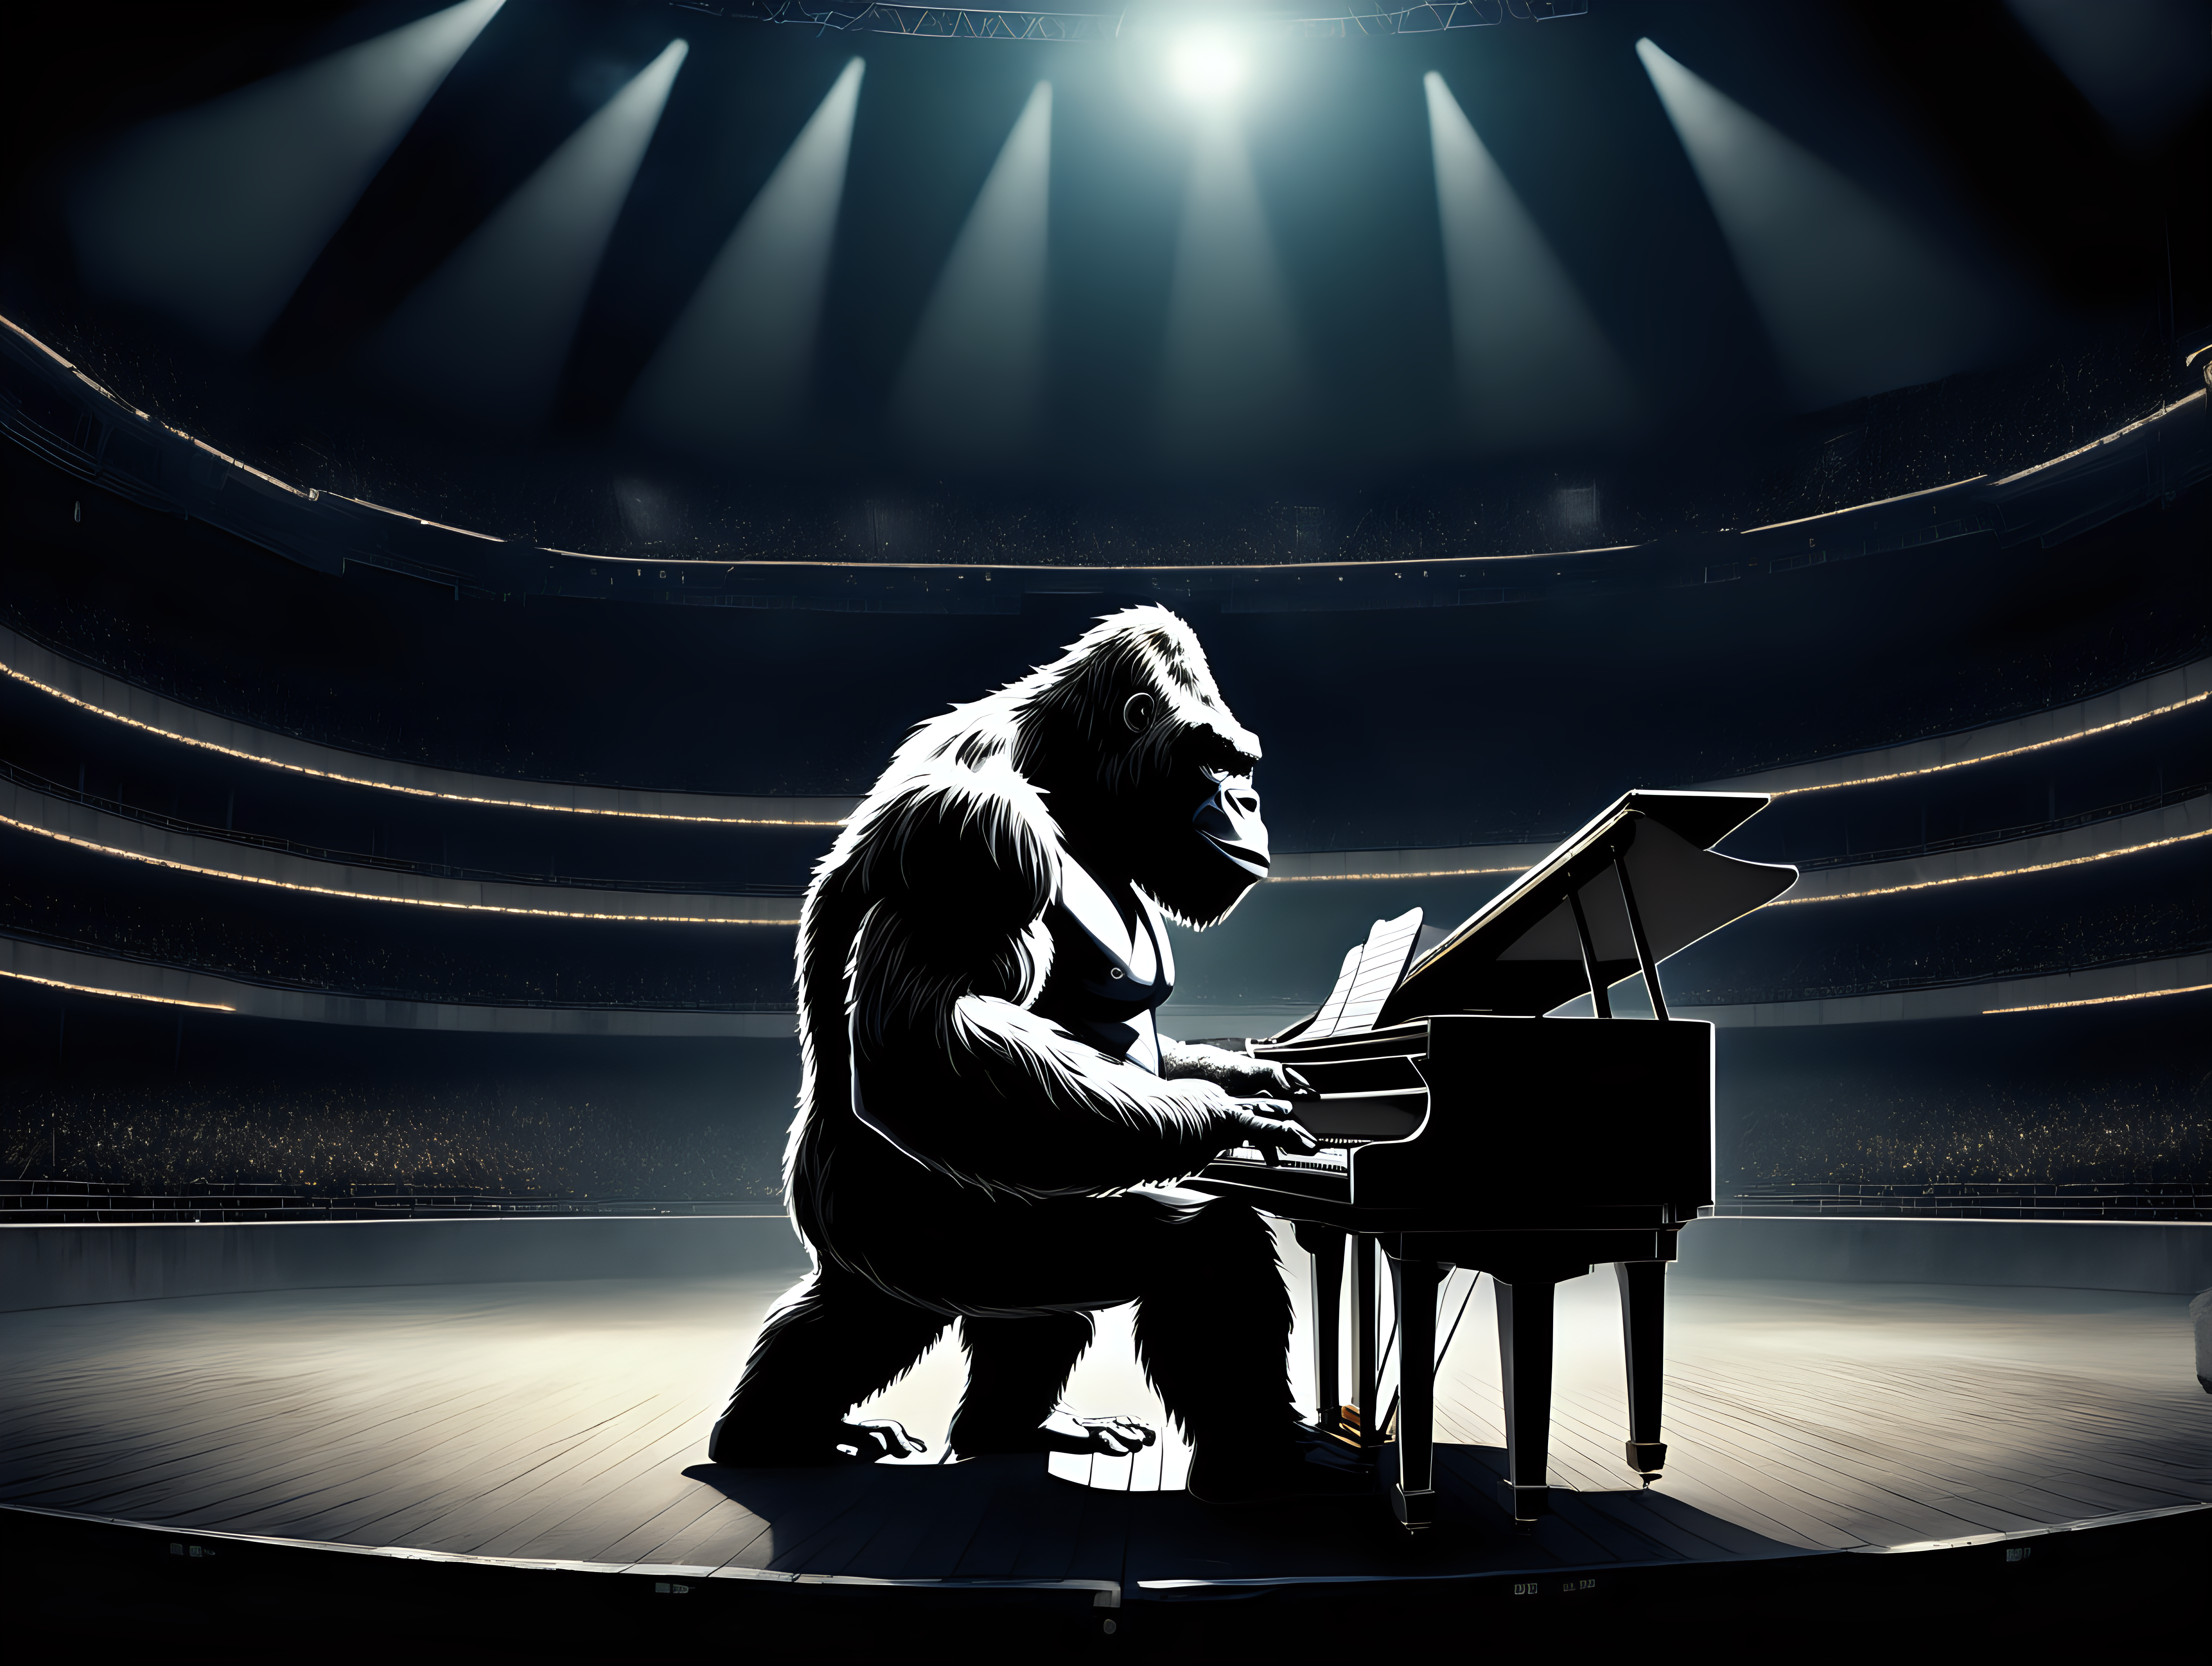 King Kong playing a piano
 in an arena at night